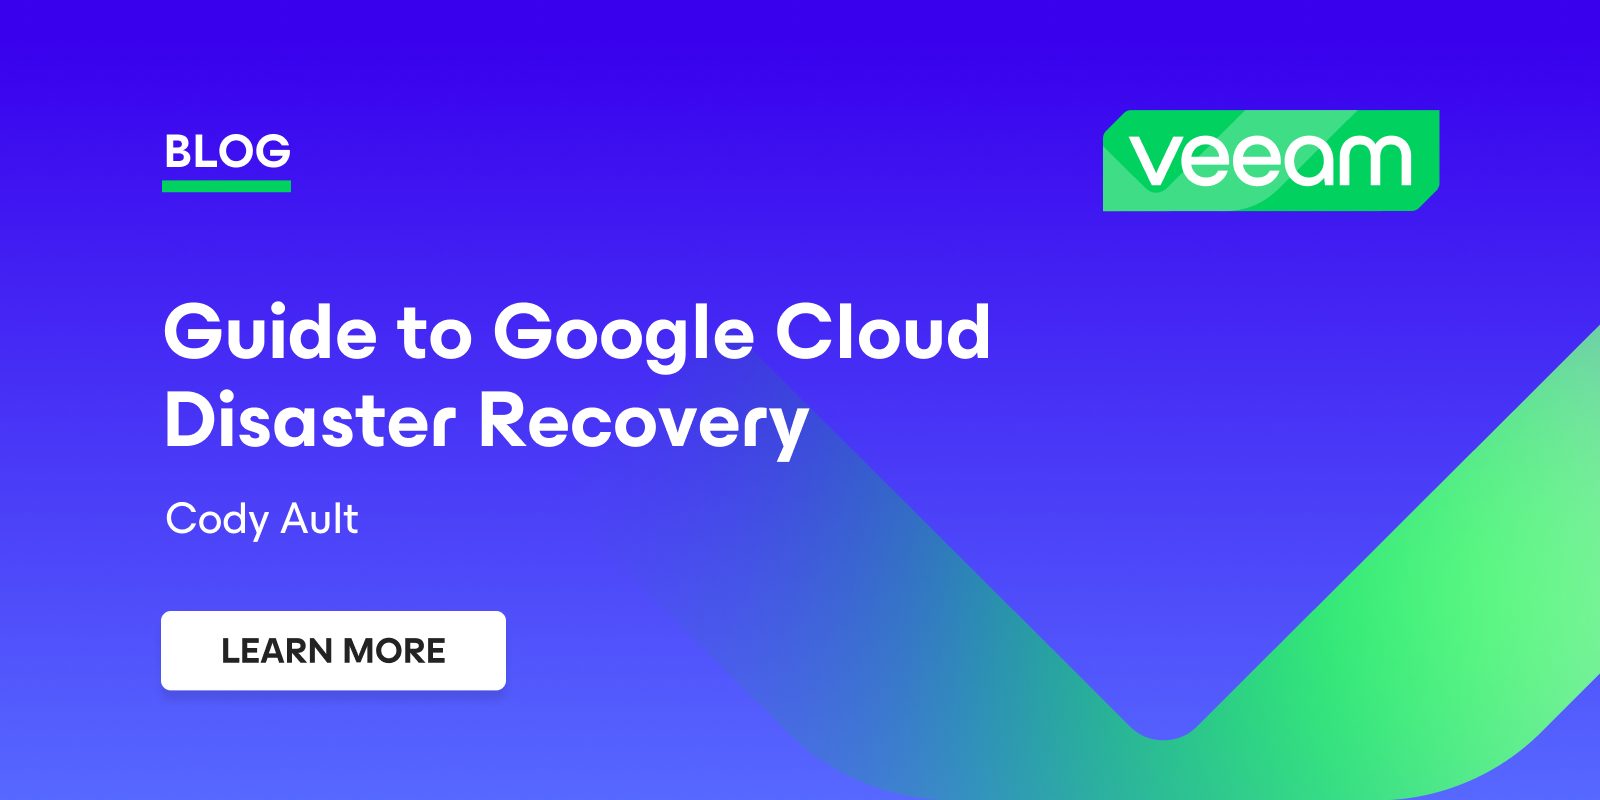 Guide to Google Cloud Disaster Recovery